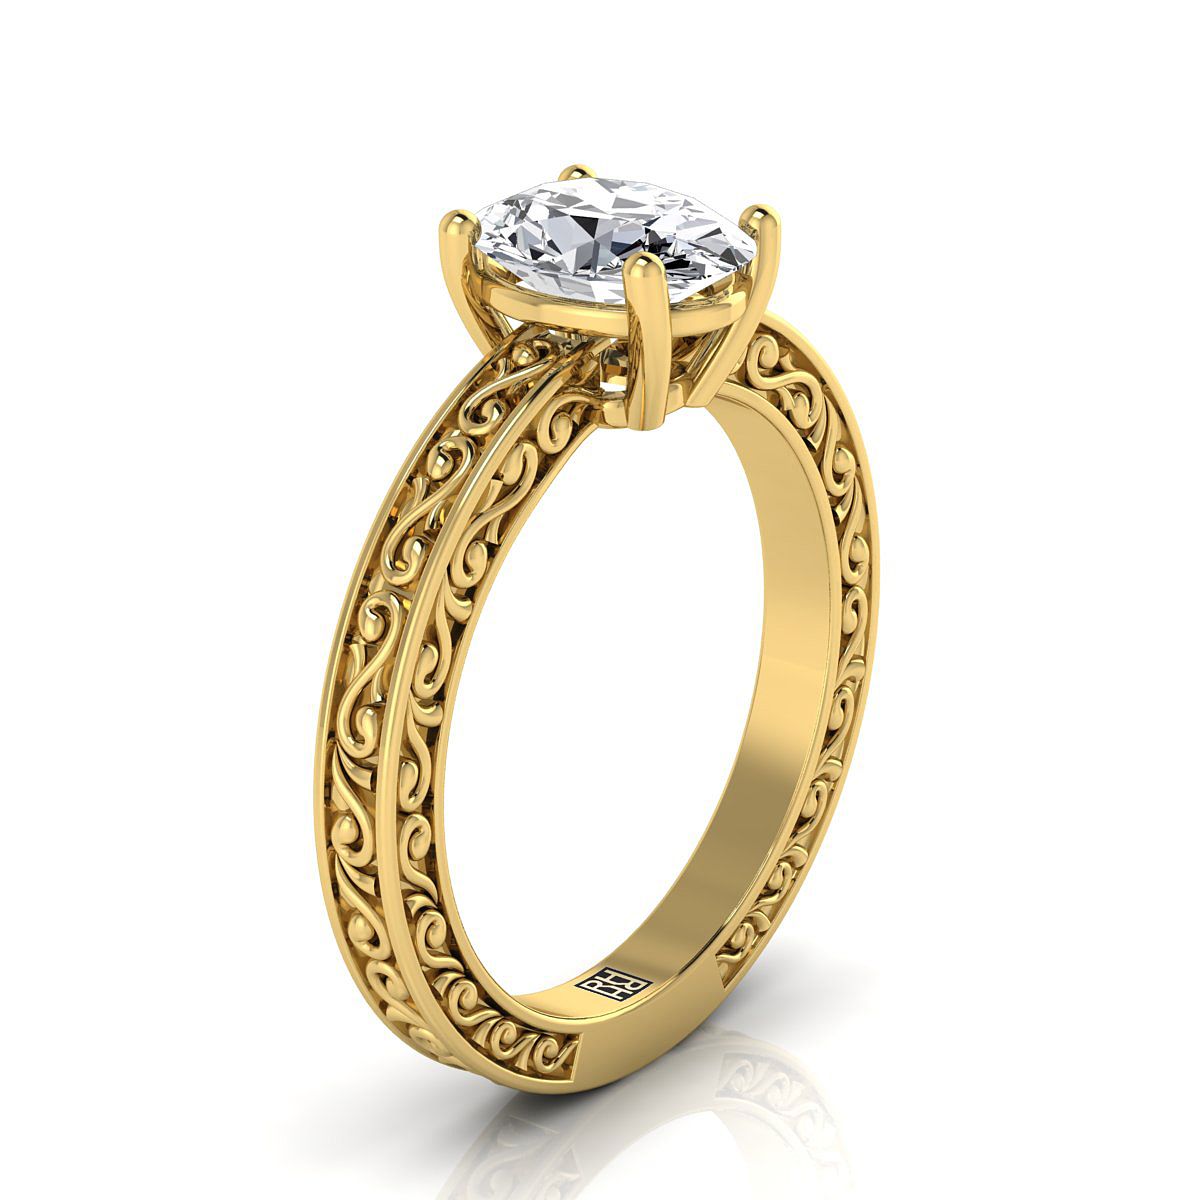 18K Yellow Gold Oval Hand Engraved Scroll Vintage Solitaire Engagement Ring